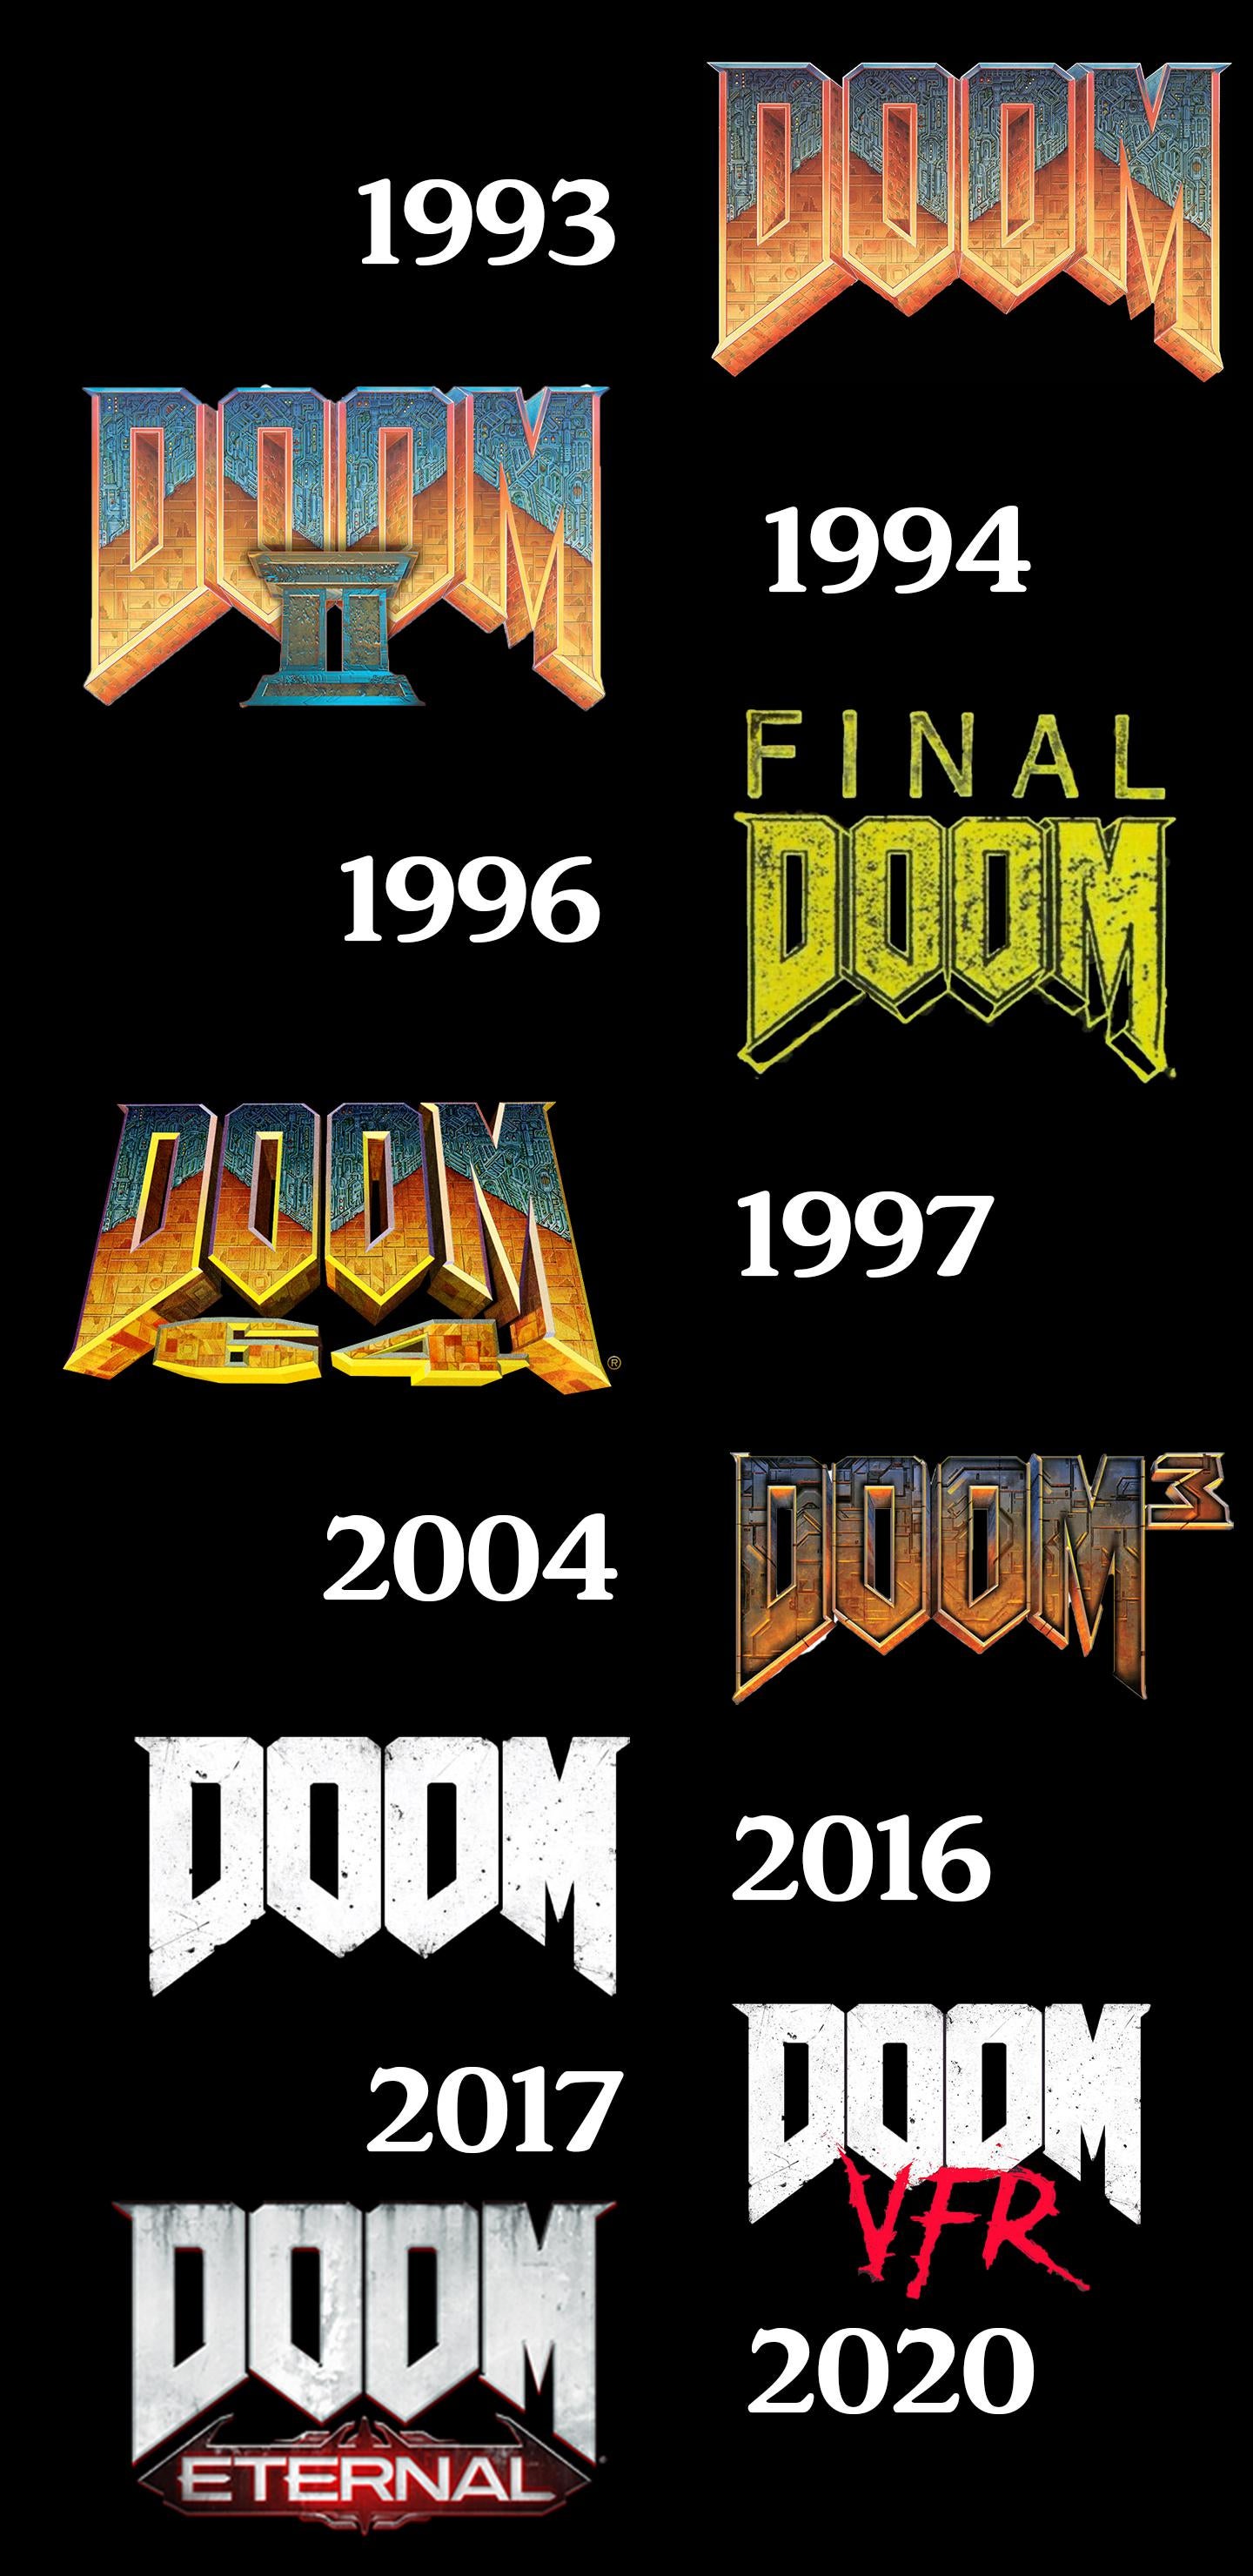 An Update To My Previous Post Added Doom Vfr And Final